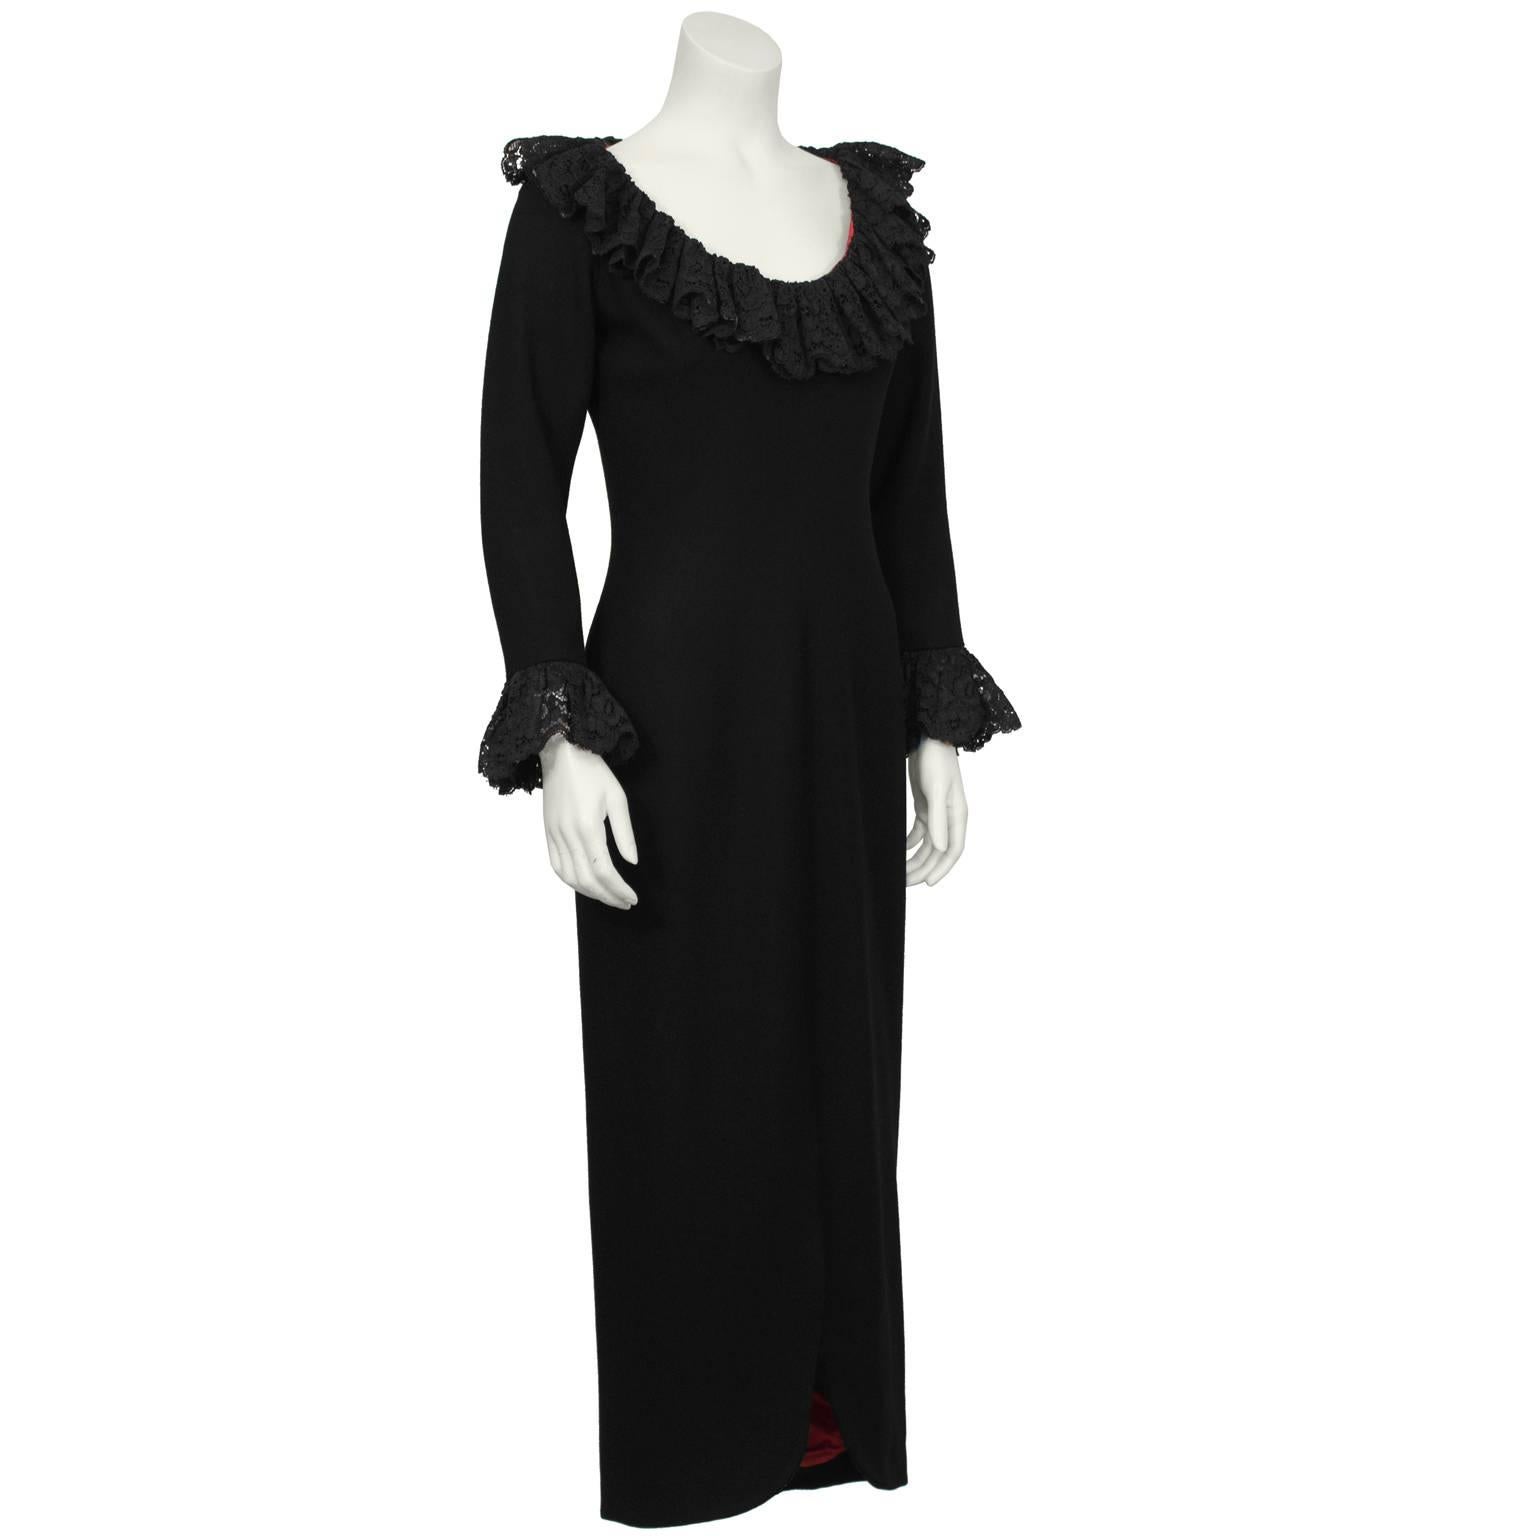 Beautiful and dramatic Spanish inspired black wool gown with lace at the neckline and cuffs. The dress has a U shaped neckline trimmed in exquisite black lace. The bracelet length sleeves are trimmed in matching lace. Form fitted through the waist